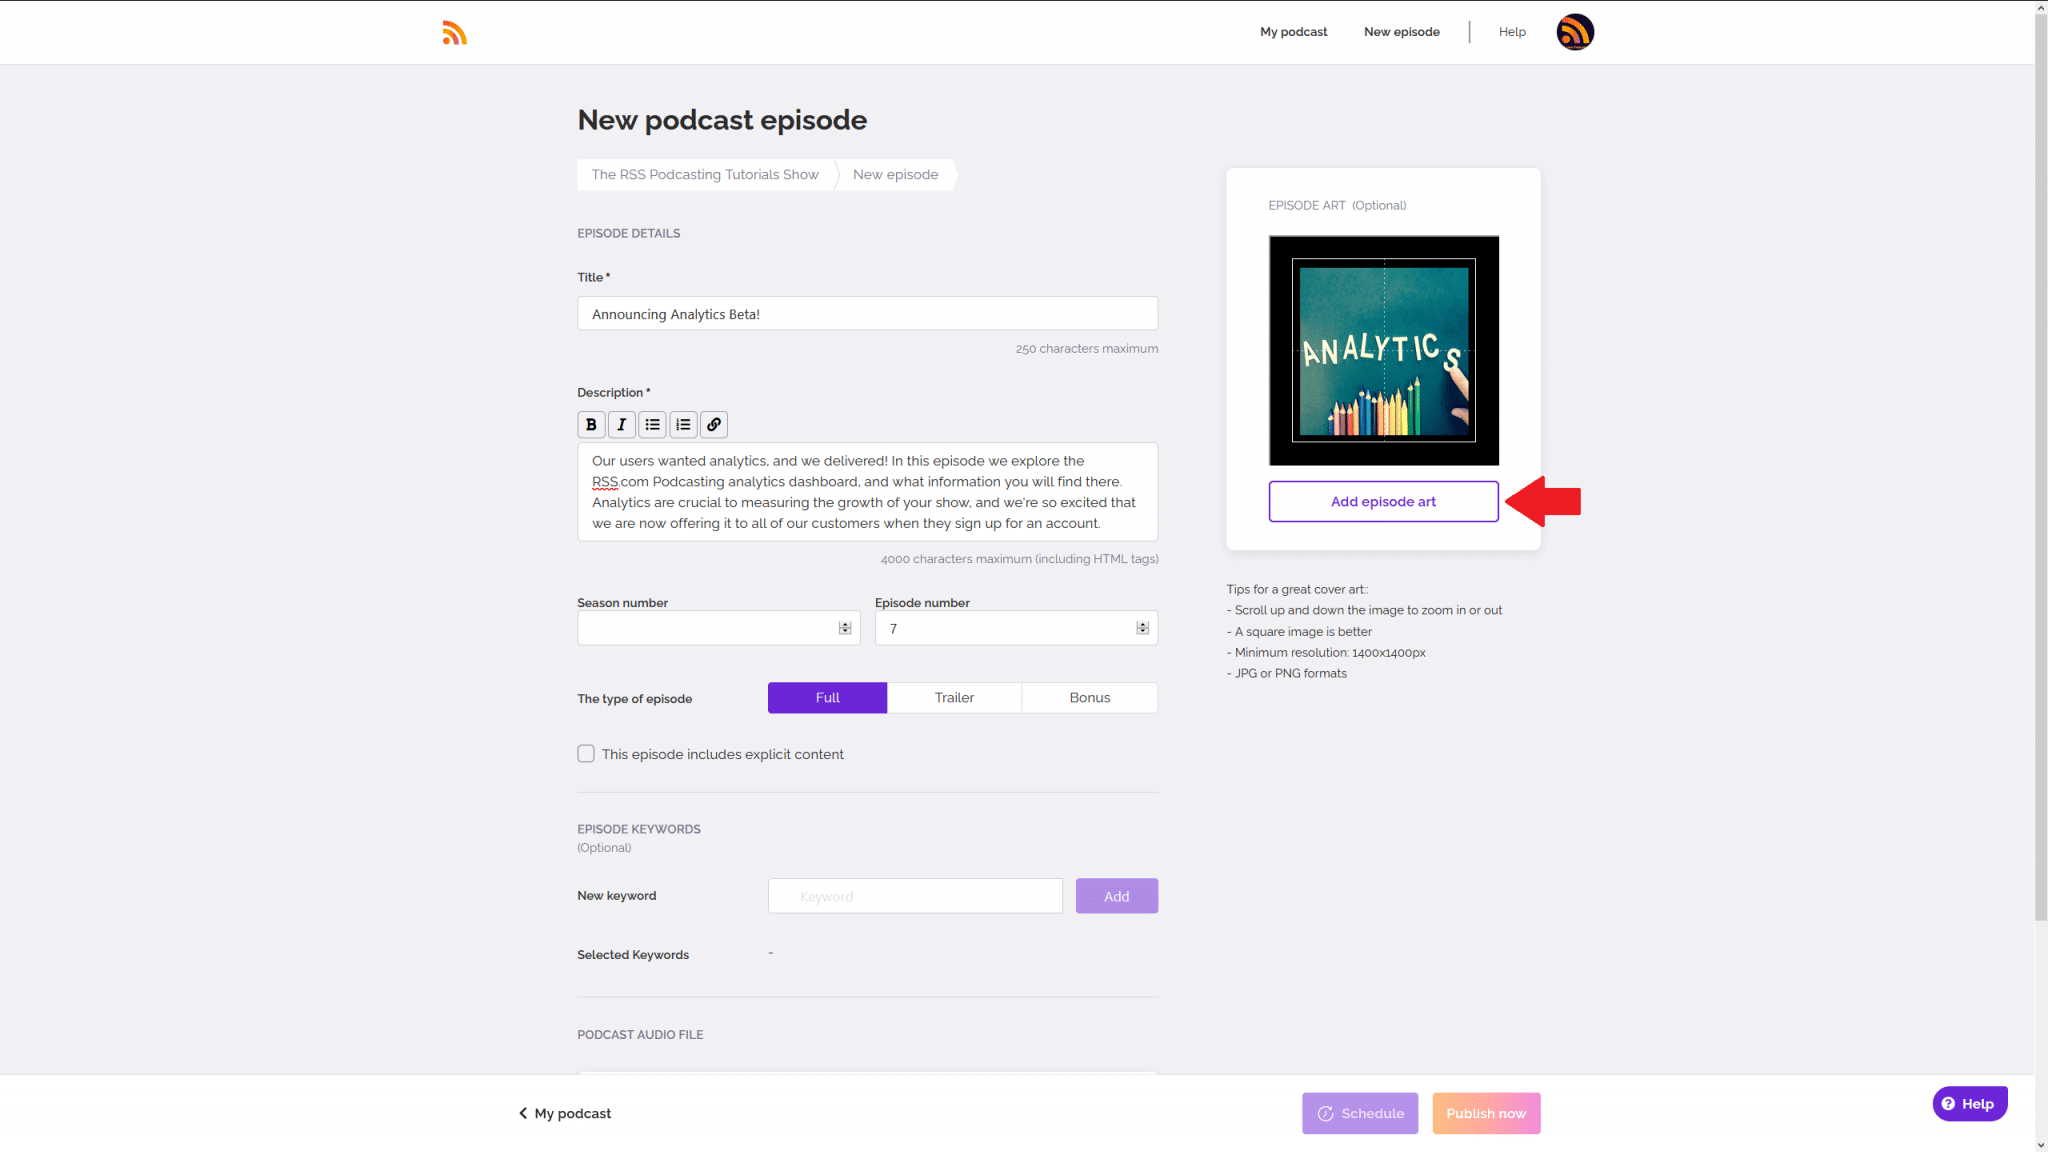 add episode art for your podcast